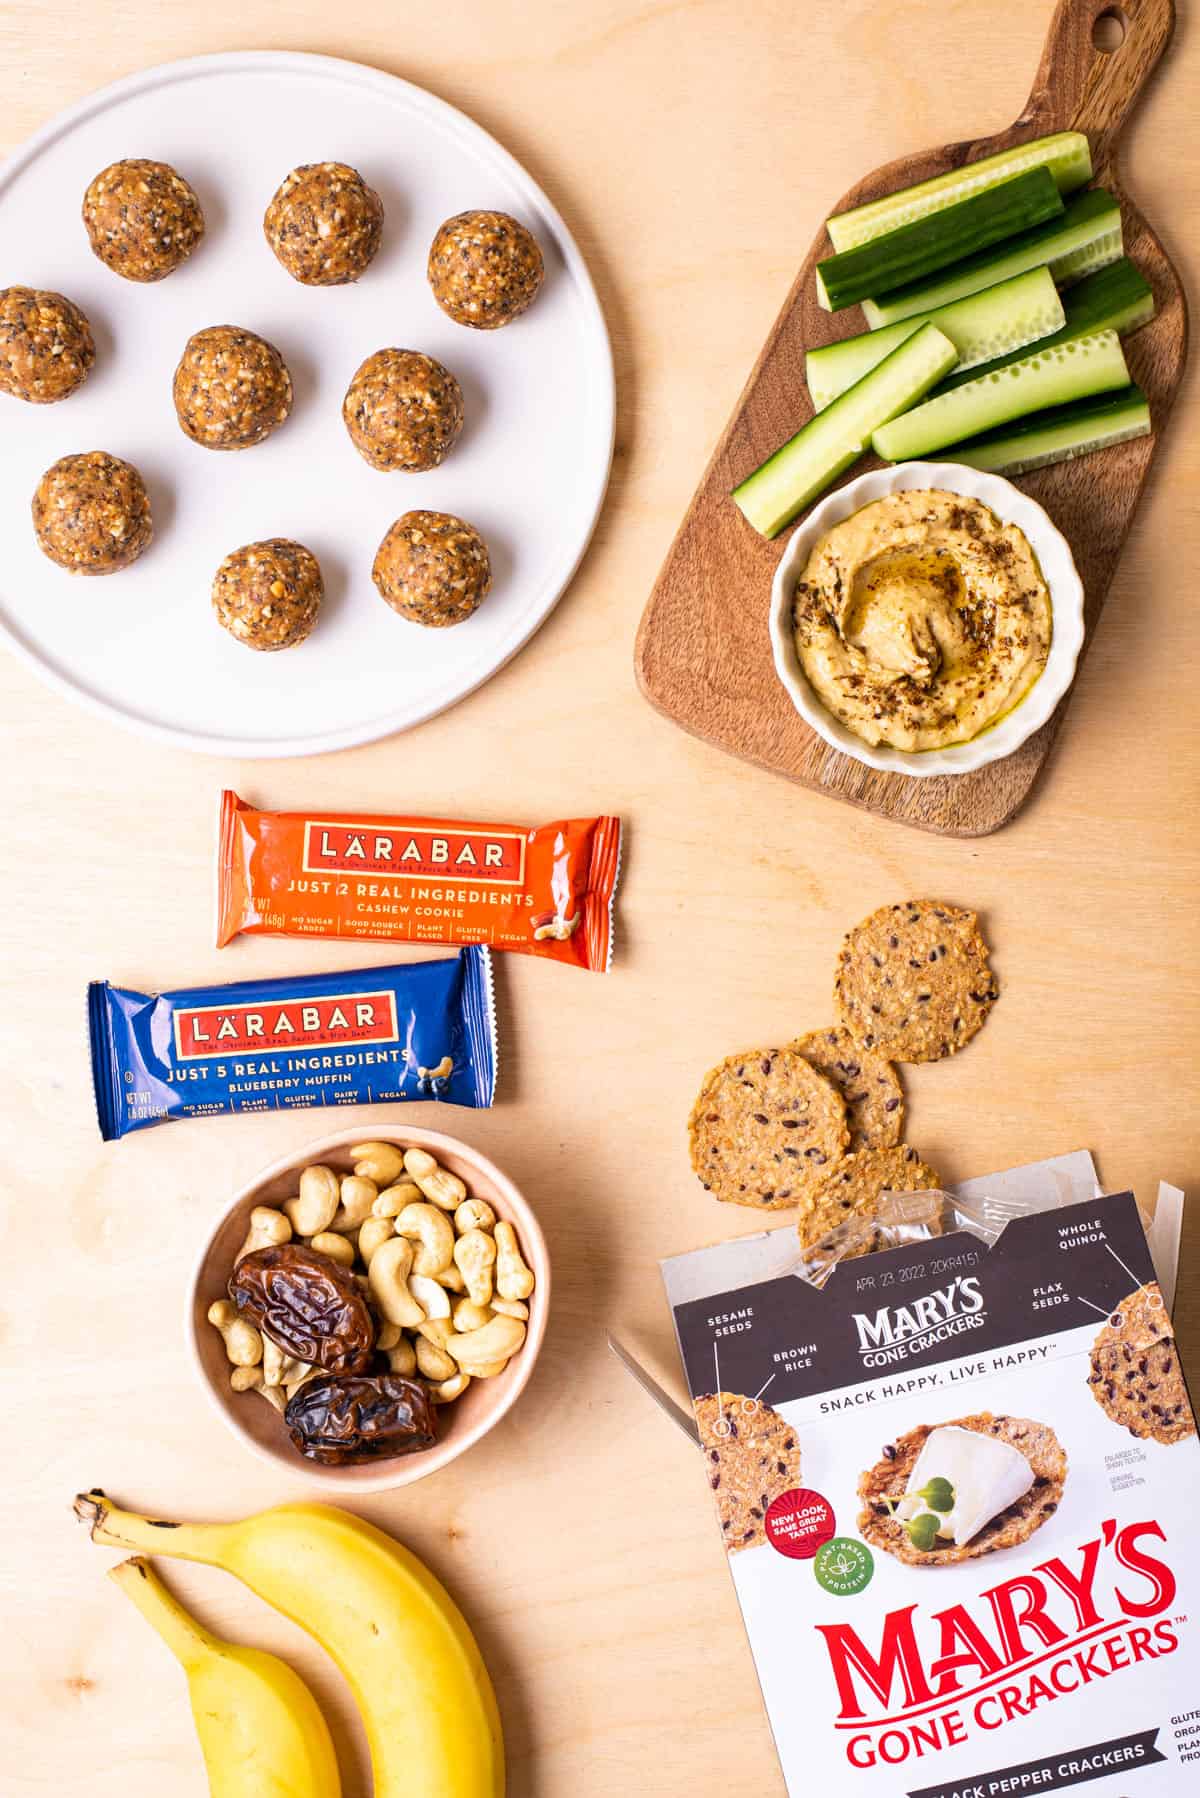 Plant-based healthy snacking ideas gathered on a wooden table: including energy balls, hummus, Larabars, and bananas.